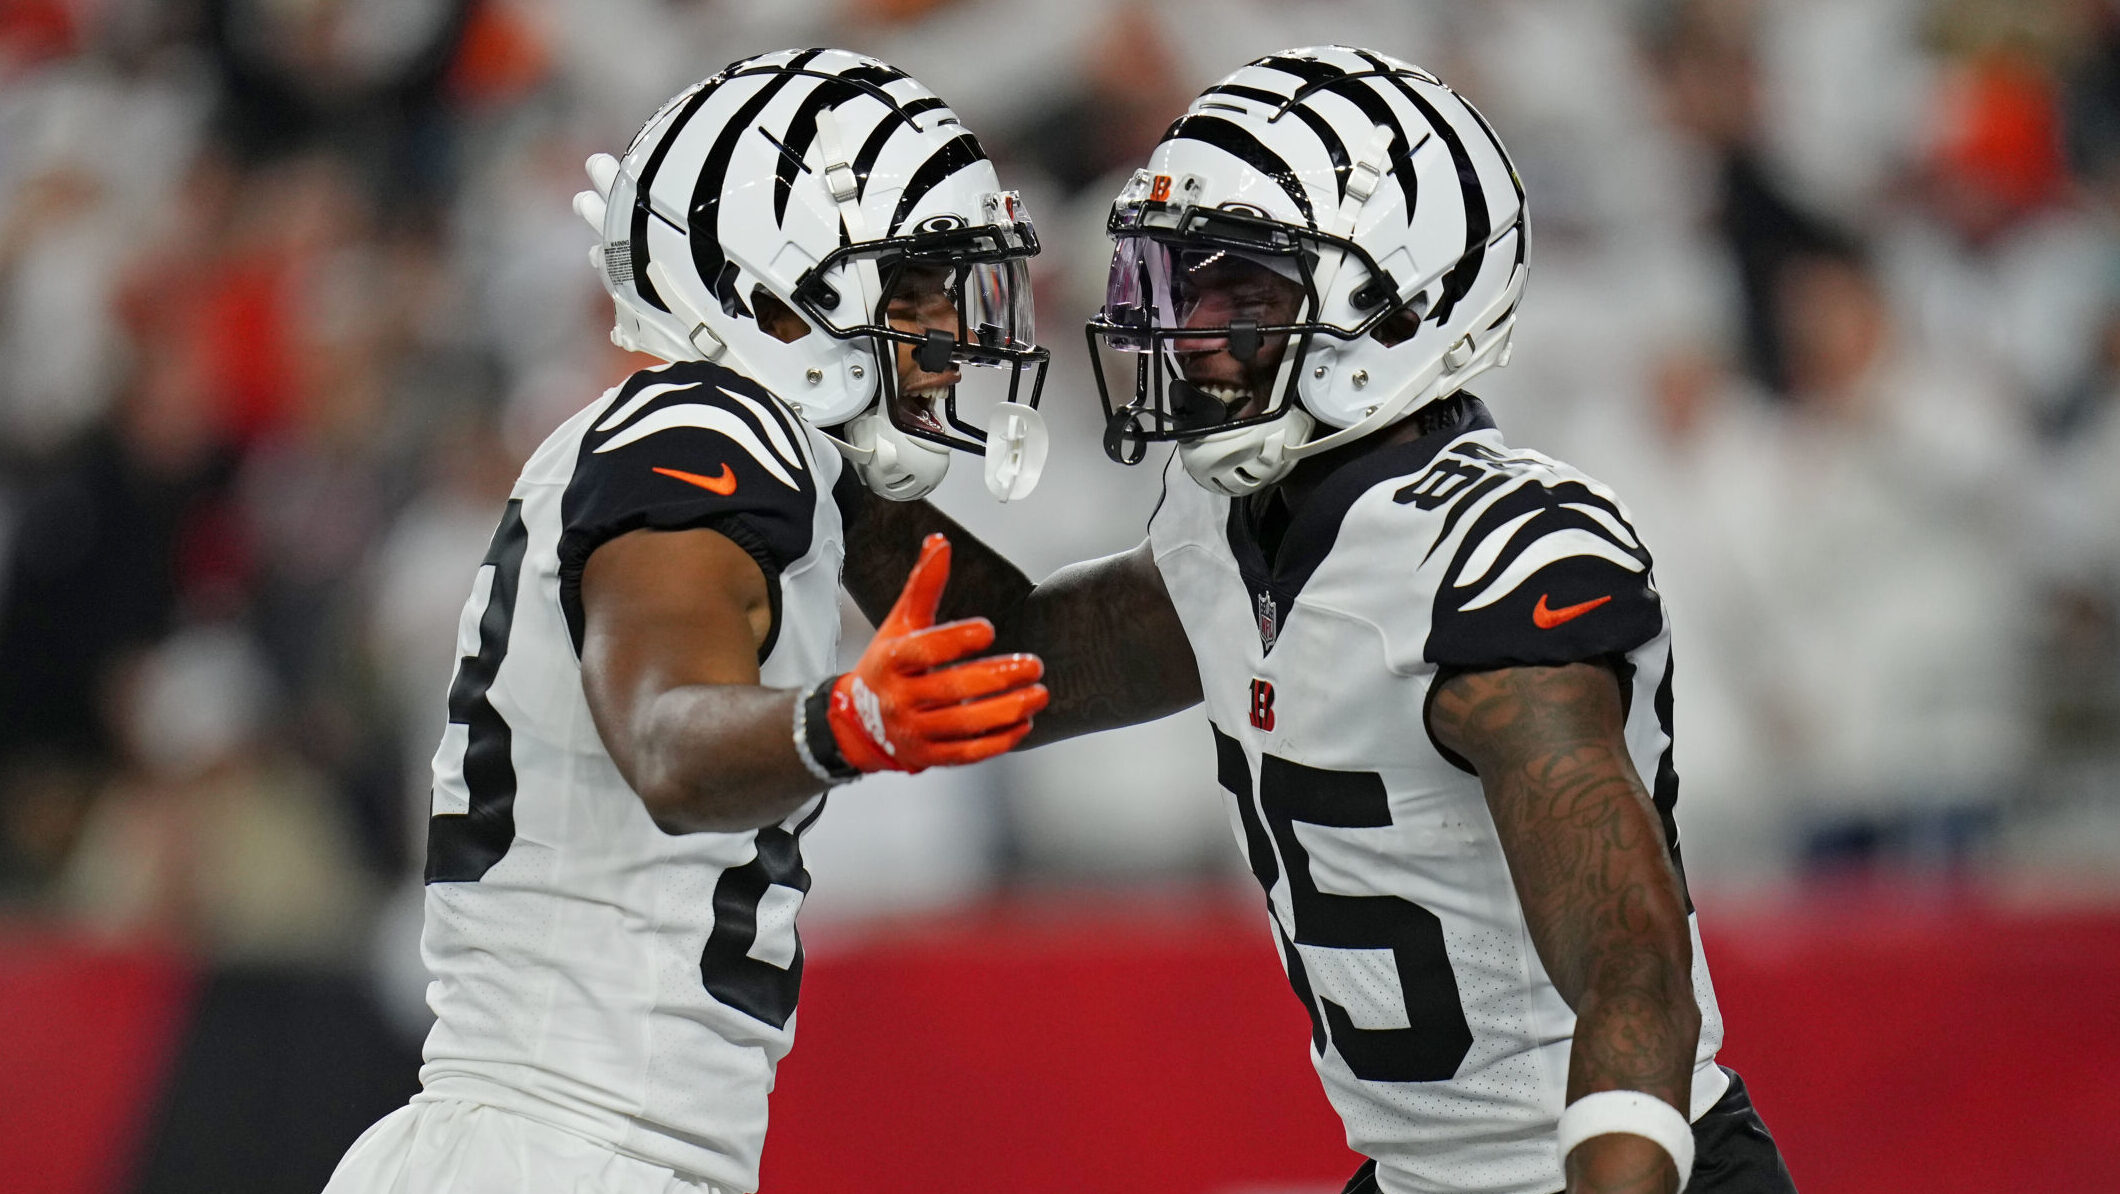 Bengals wide receivers Tyler Boyd and Tee Higgins celebrate after a touchdown